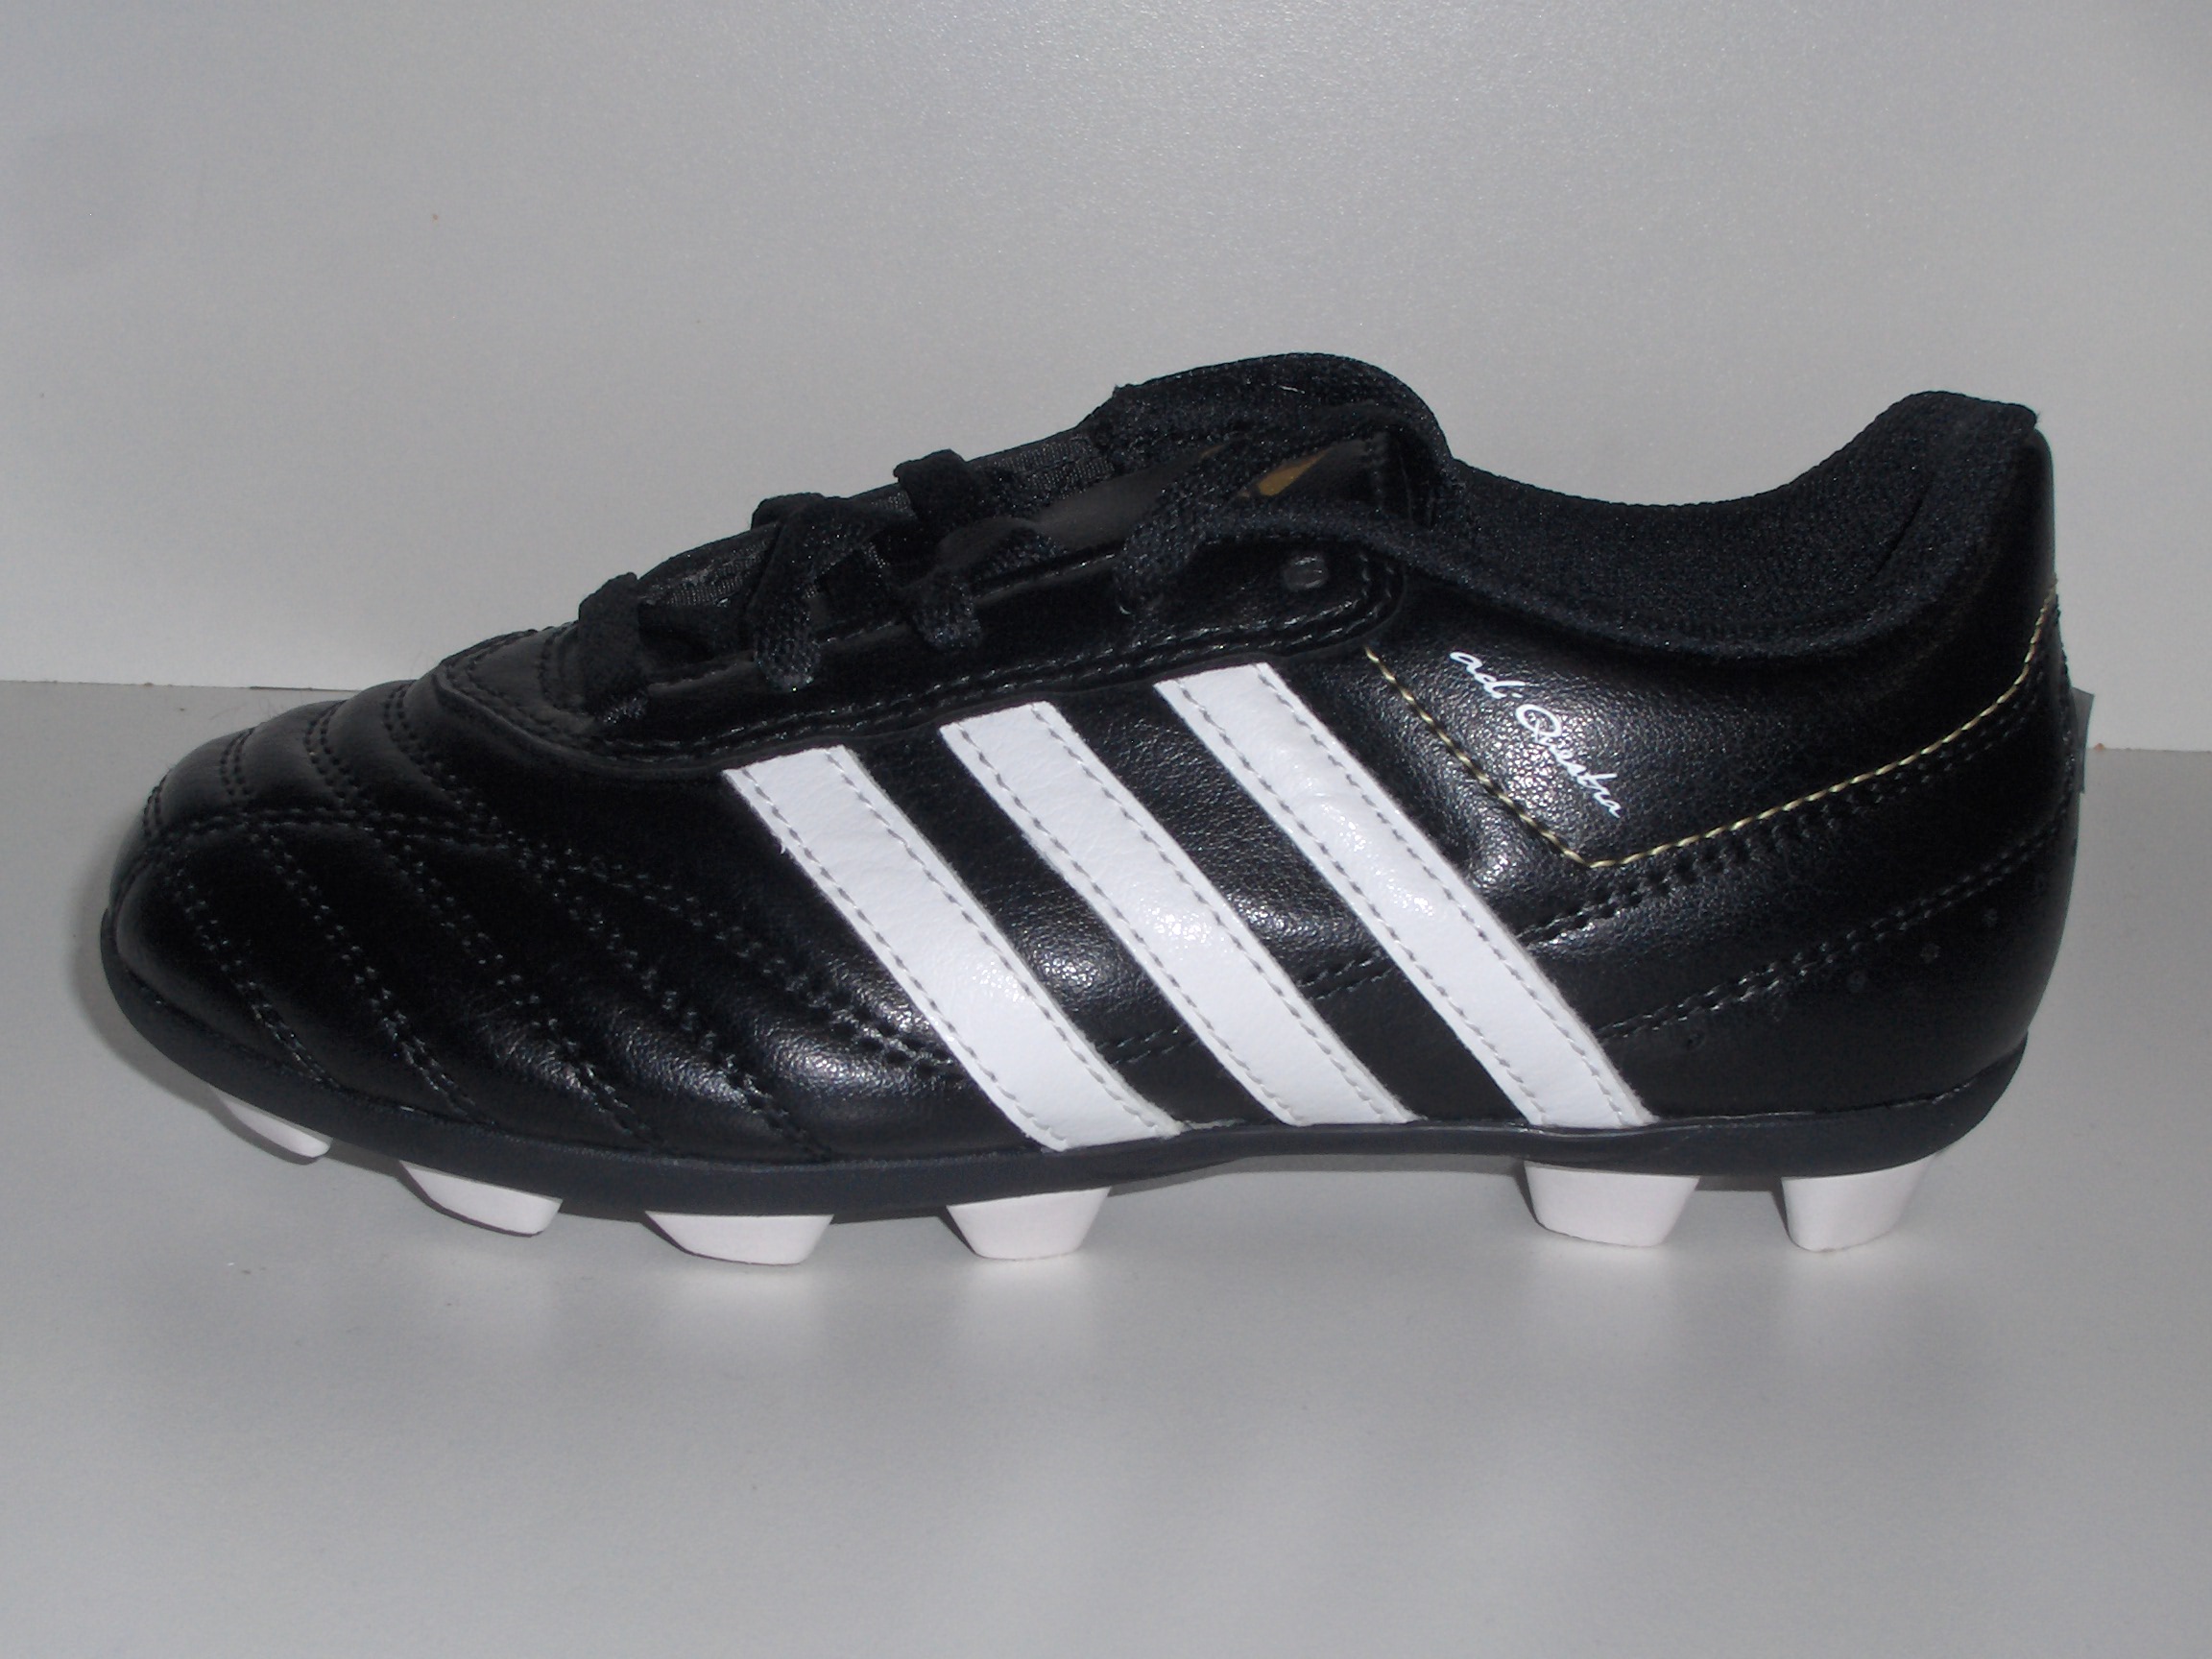 adidas soccer cleats sale